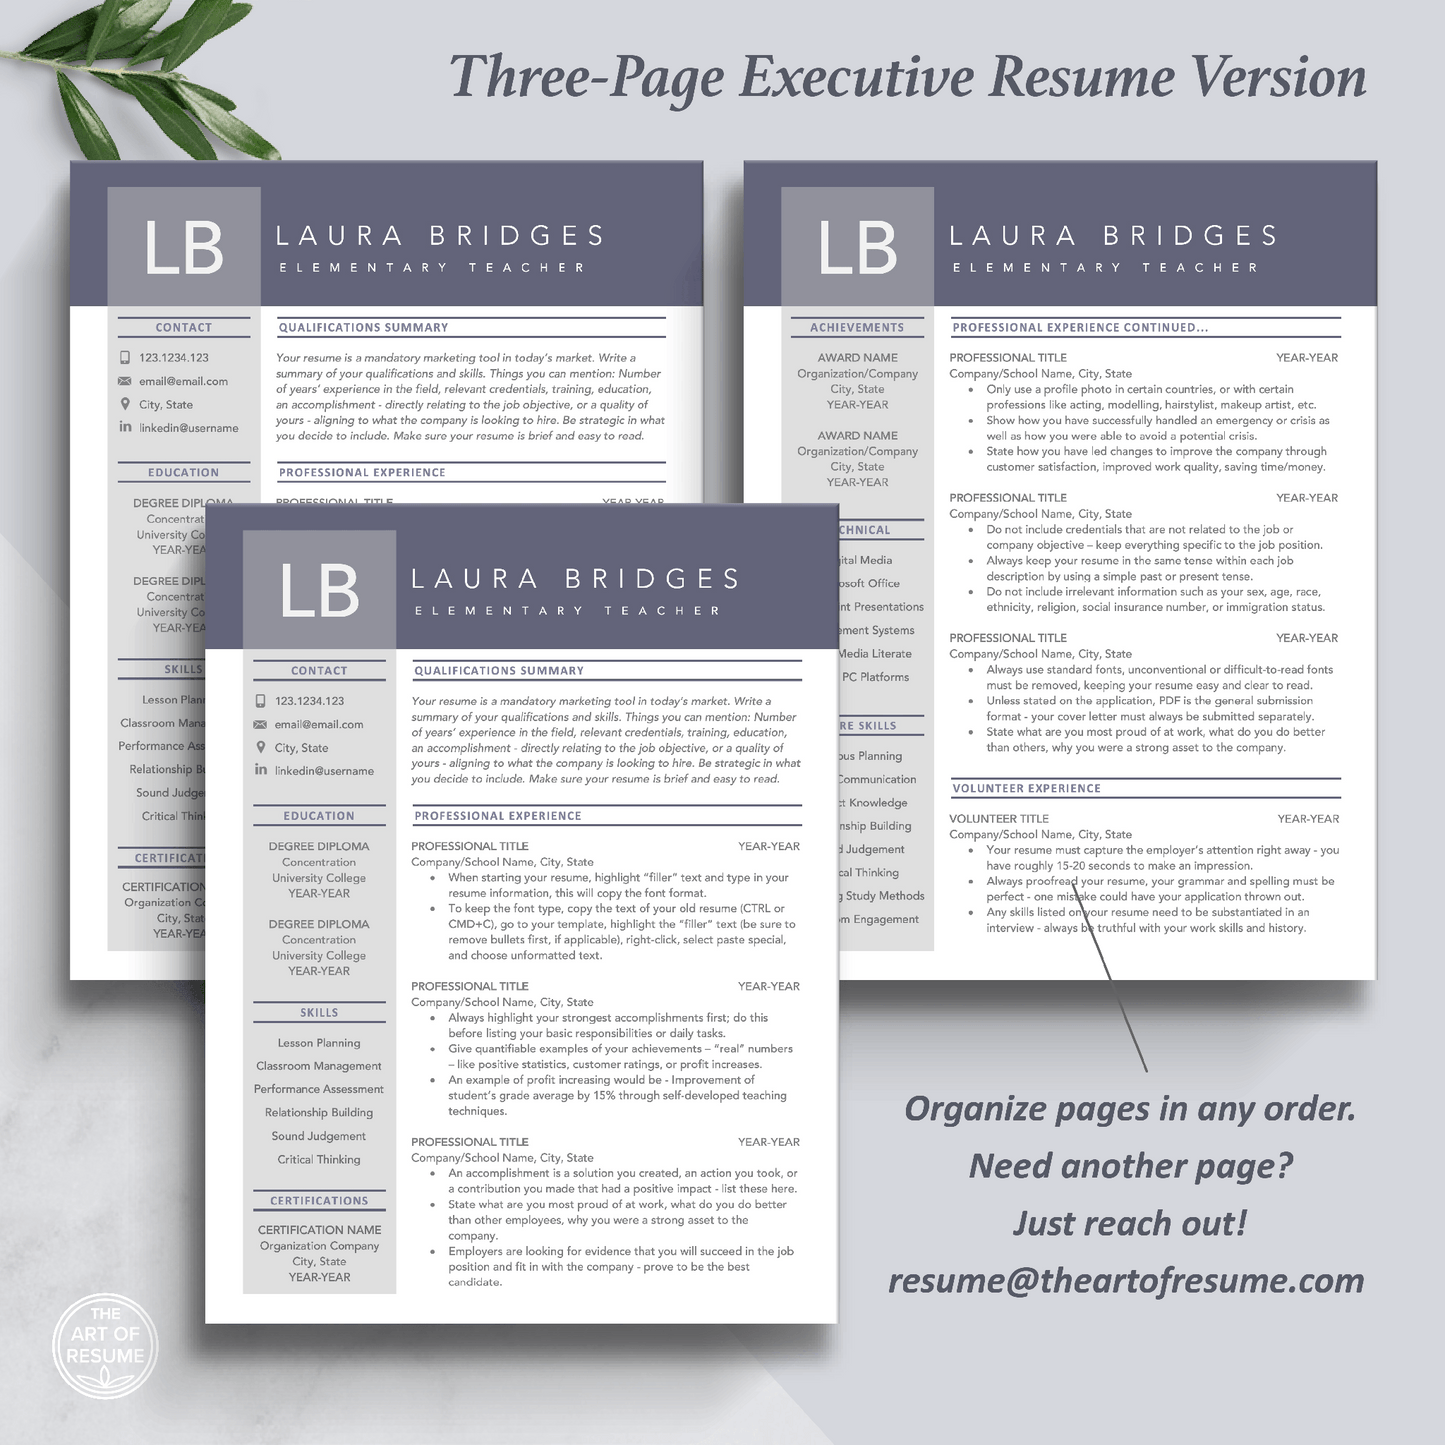 The Art of Resume Templates | Three-Page Professional Purple Executive CEO C-Suite Level  Resume CV Template Format | Curriculum Vitae